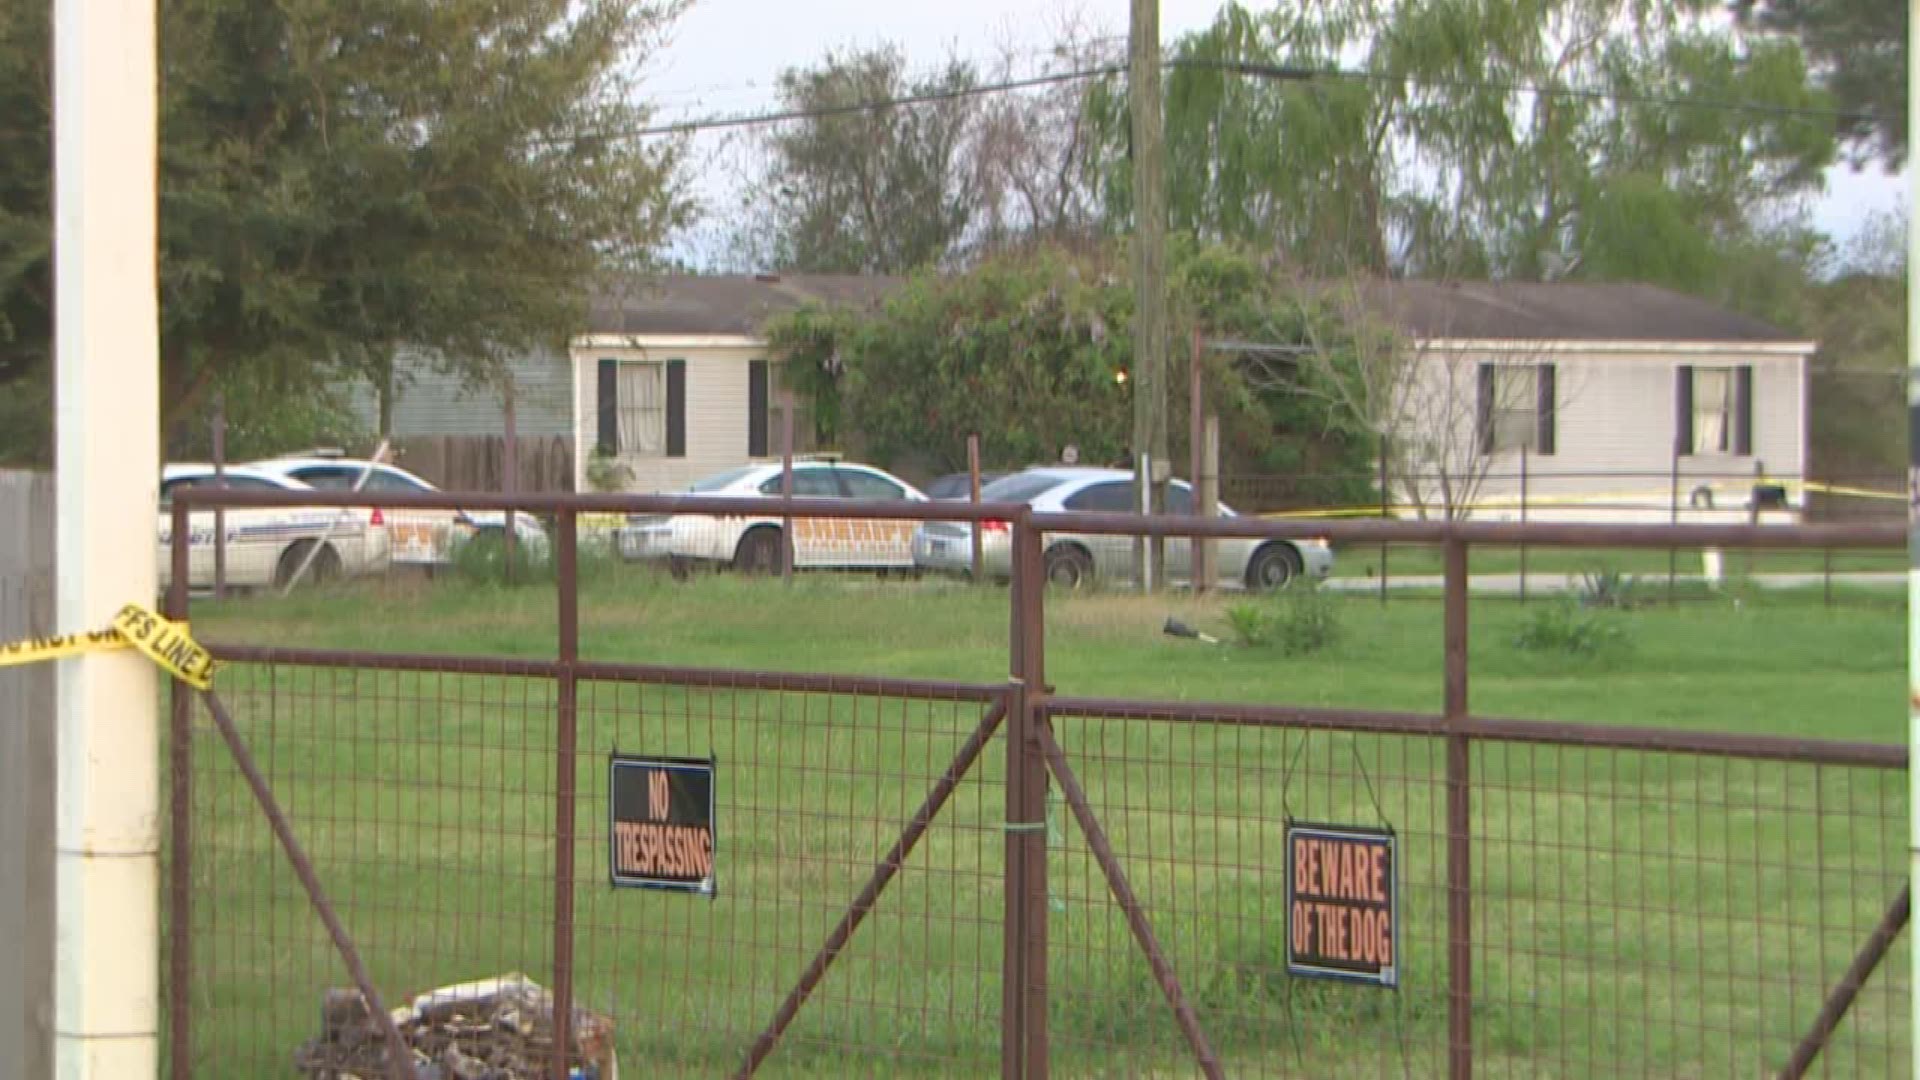 A man and a woman, both 21 years old, are in custody after a woman was found dead inside a home in Cypress on Sunday.